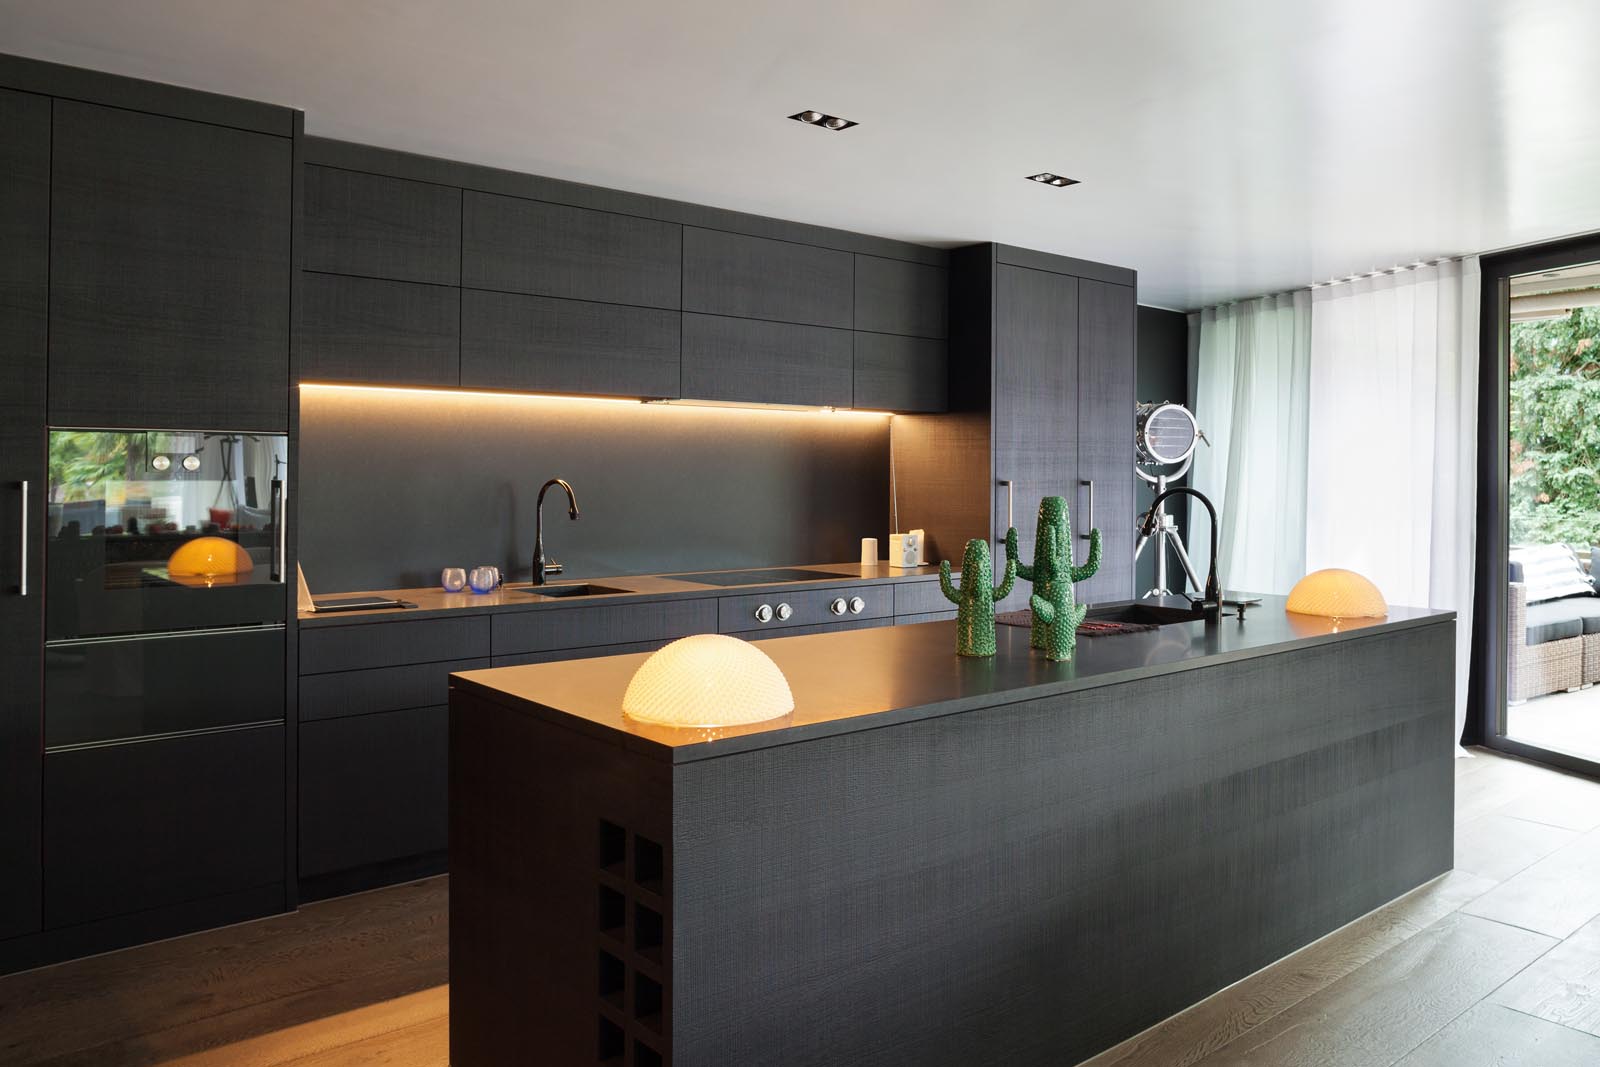 Lighting Tips for a Functional Kitchen